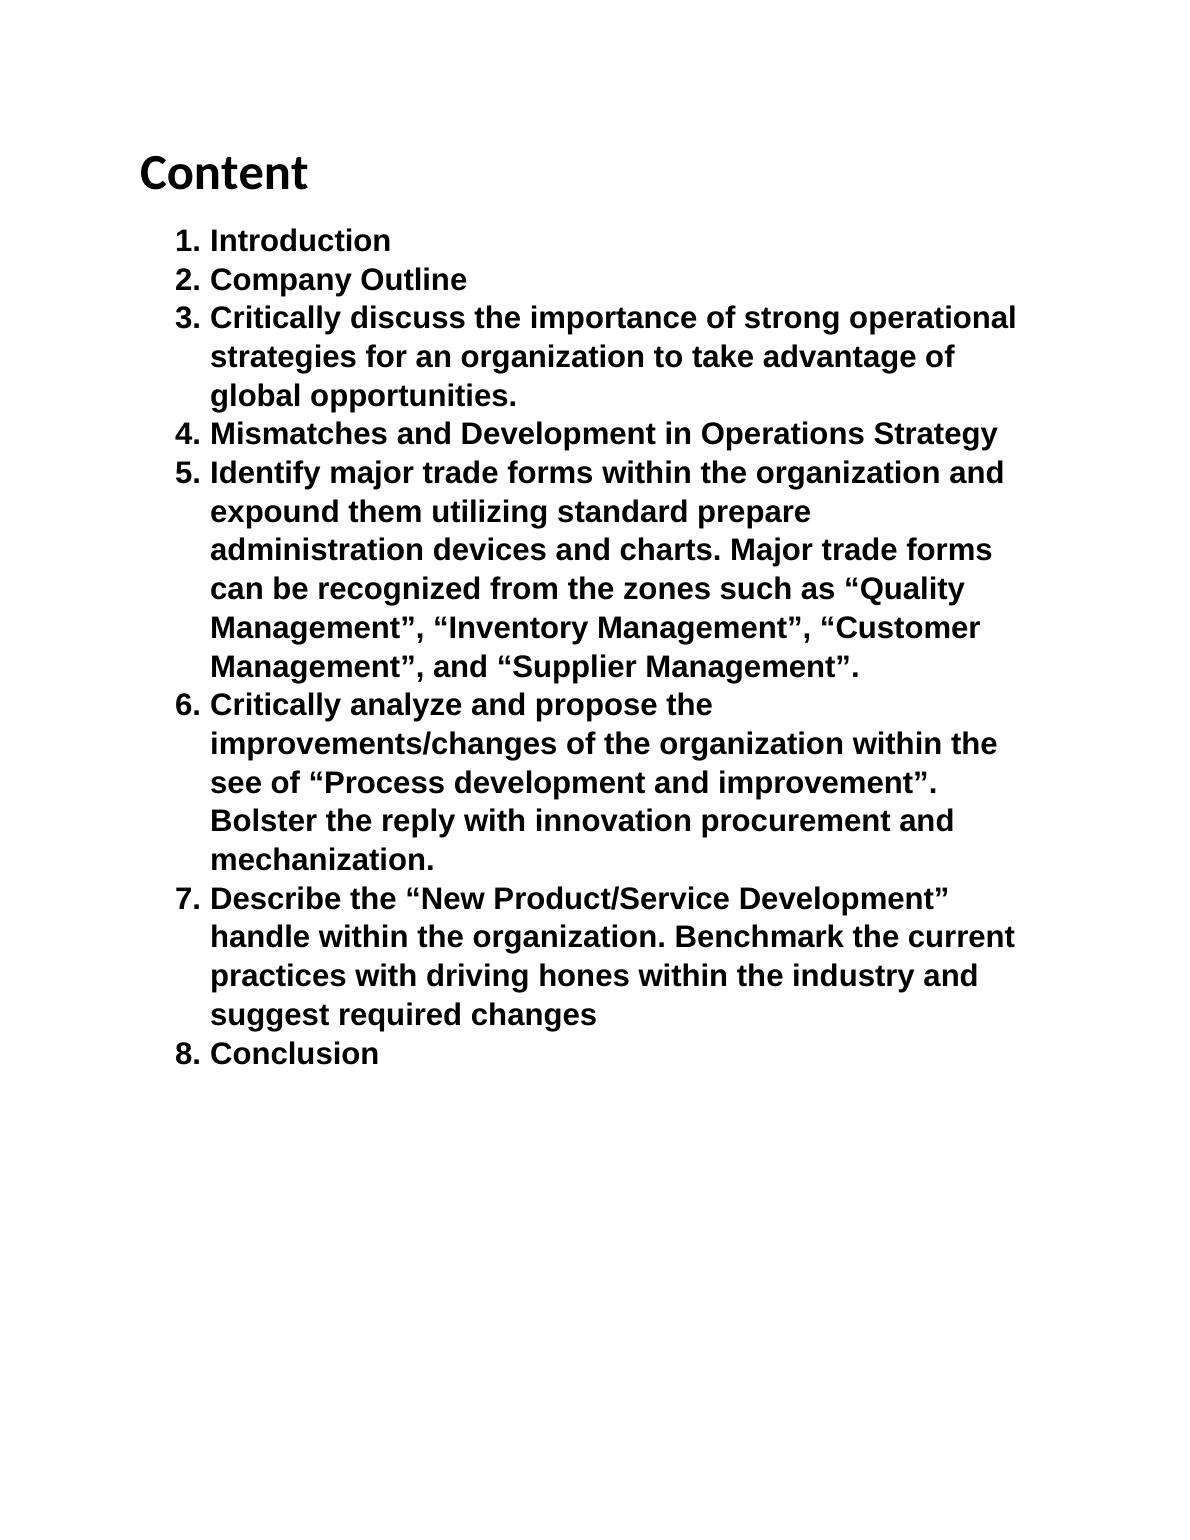 Mismatches and Development in Operations Strategy_2